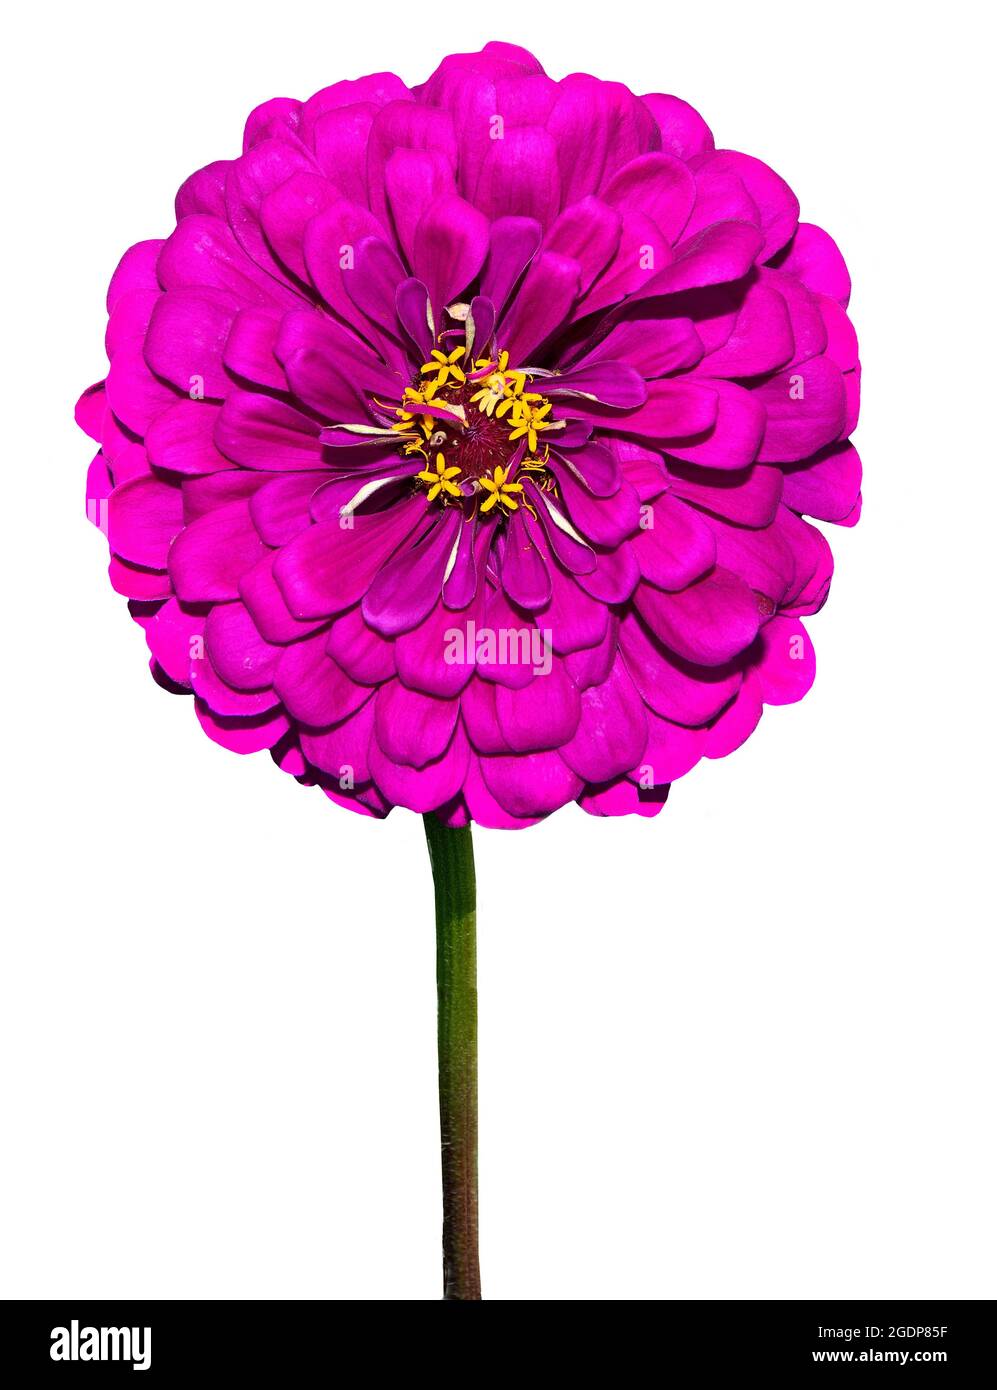 Purple pink zinnia flower on stem close up, isolated on white background. Zinnia graceful growing in garden - elegant flower. Floriculture, gardening Stock Photo